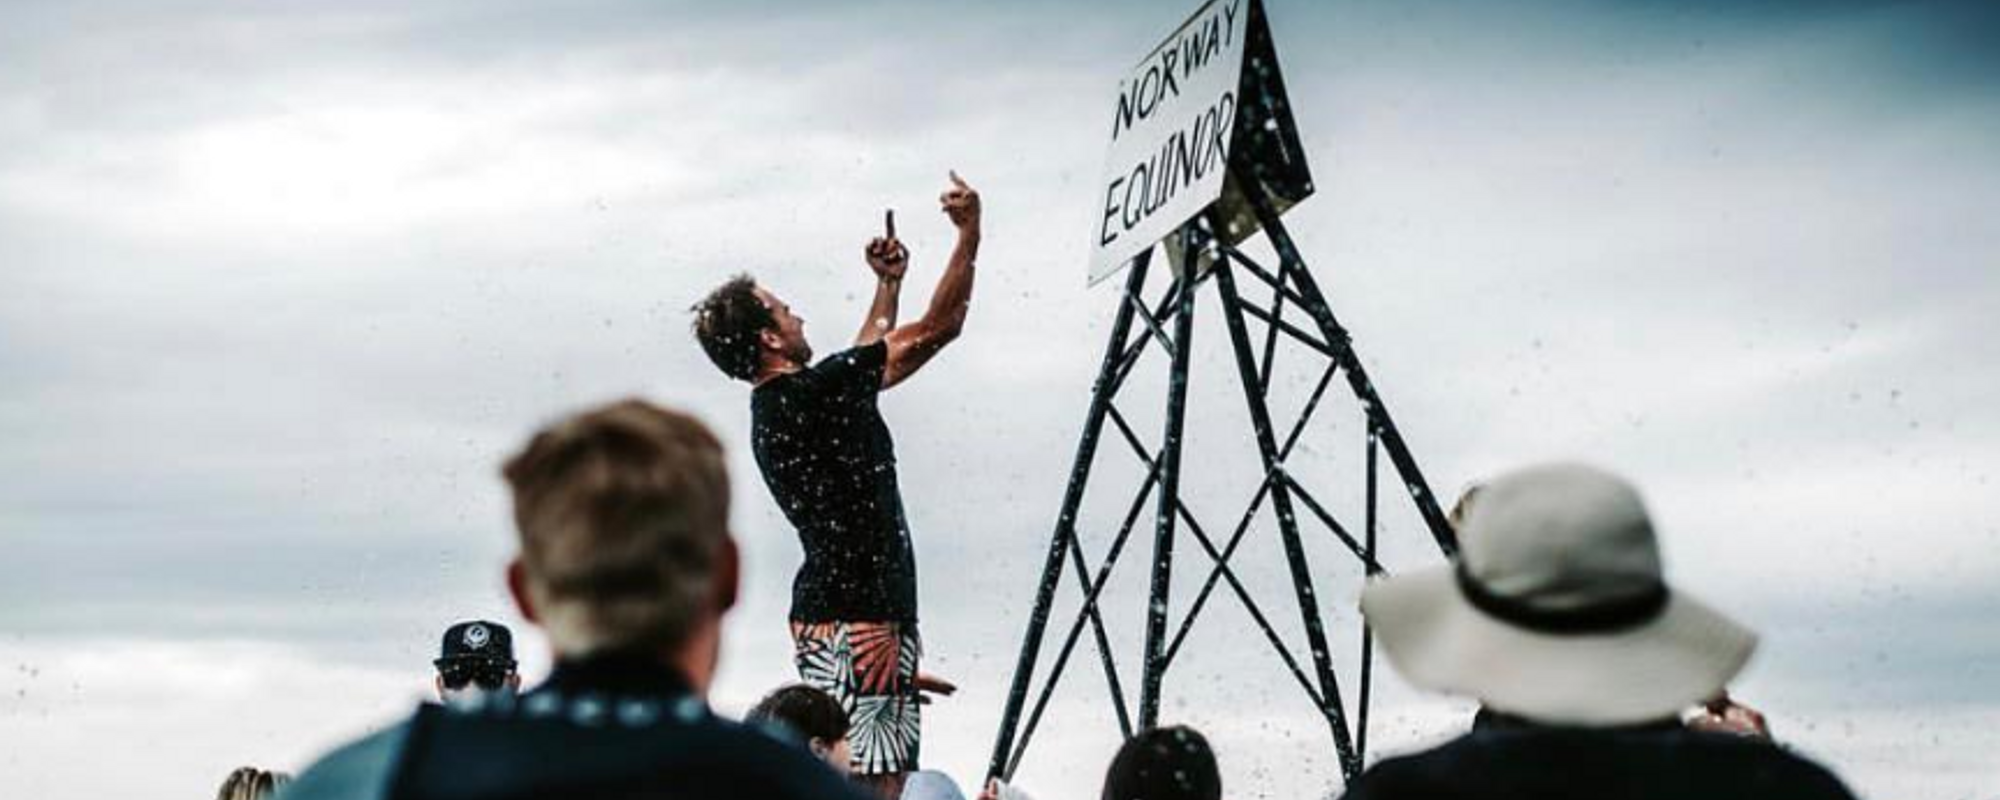 Big Oil Don't Surf: Paddle Out Protest Against Oil Drilling in Great Australian Bight